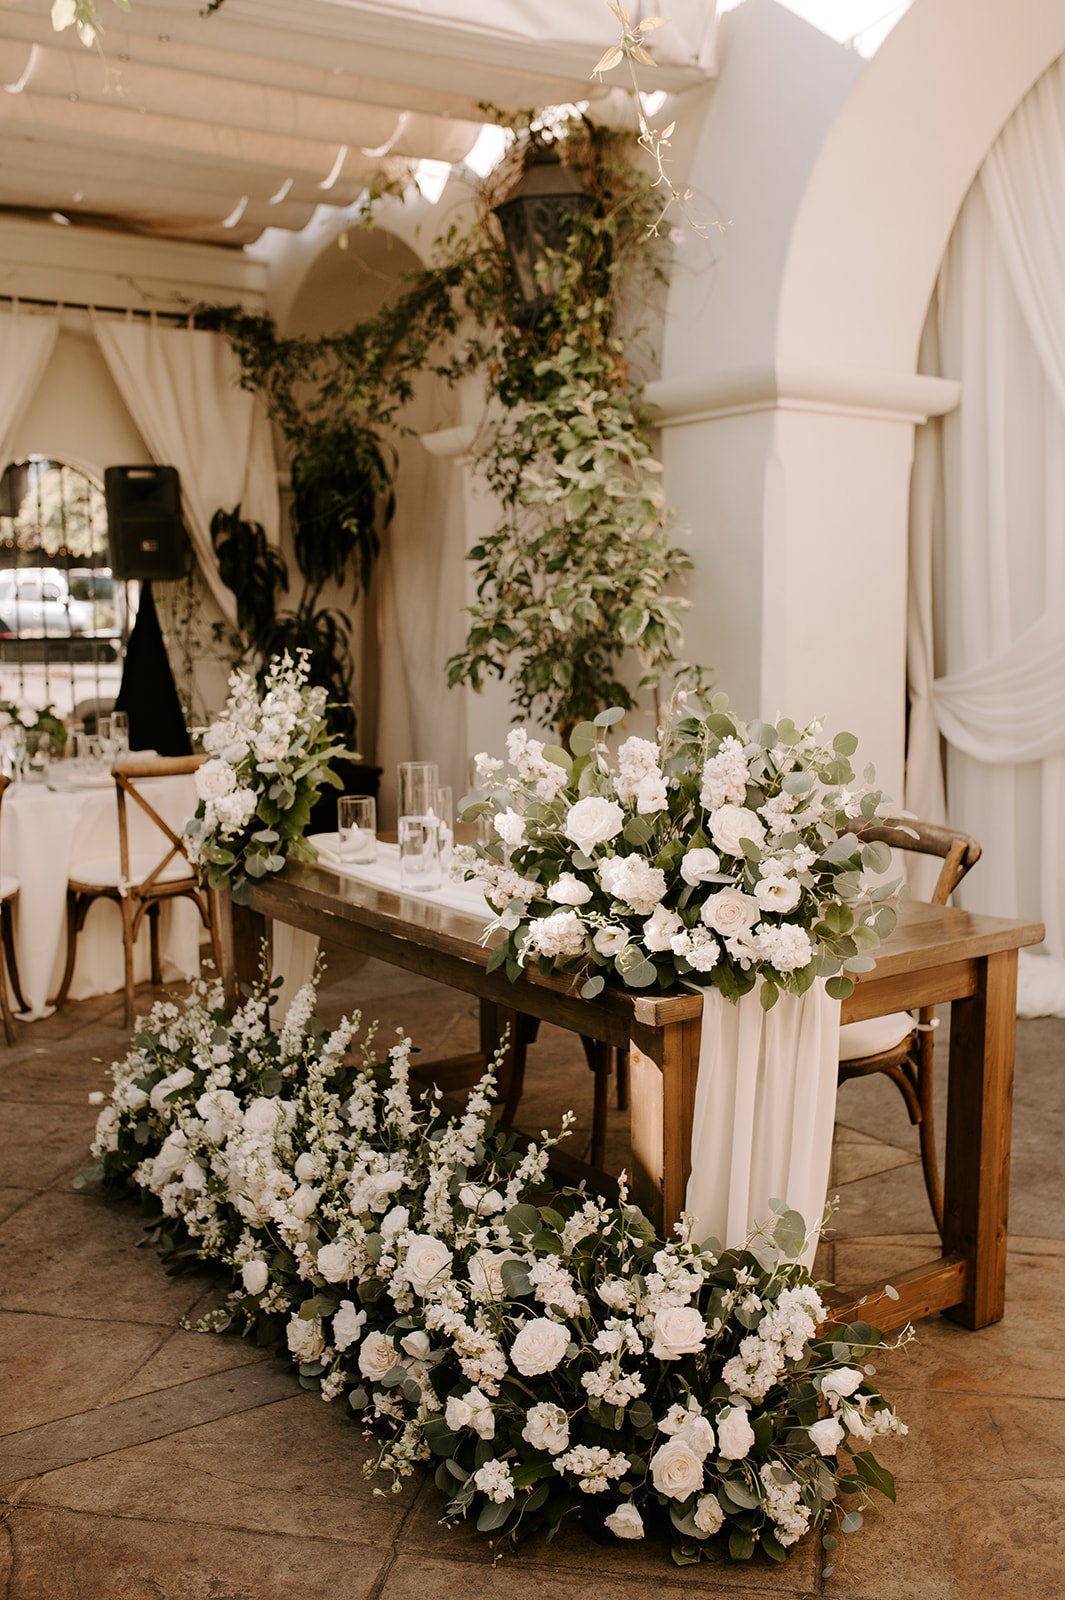 villa and vine makes for an intimate and classic wedding reception space